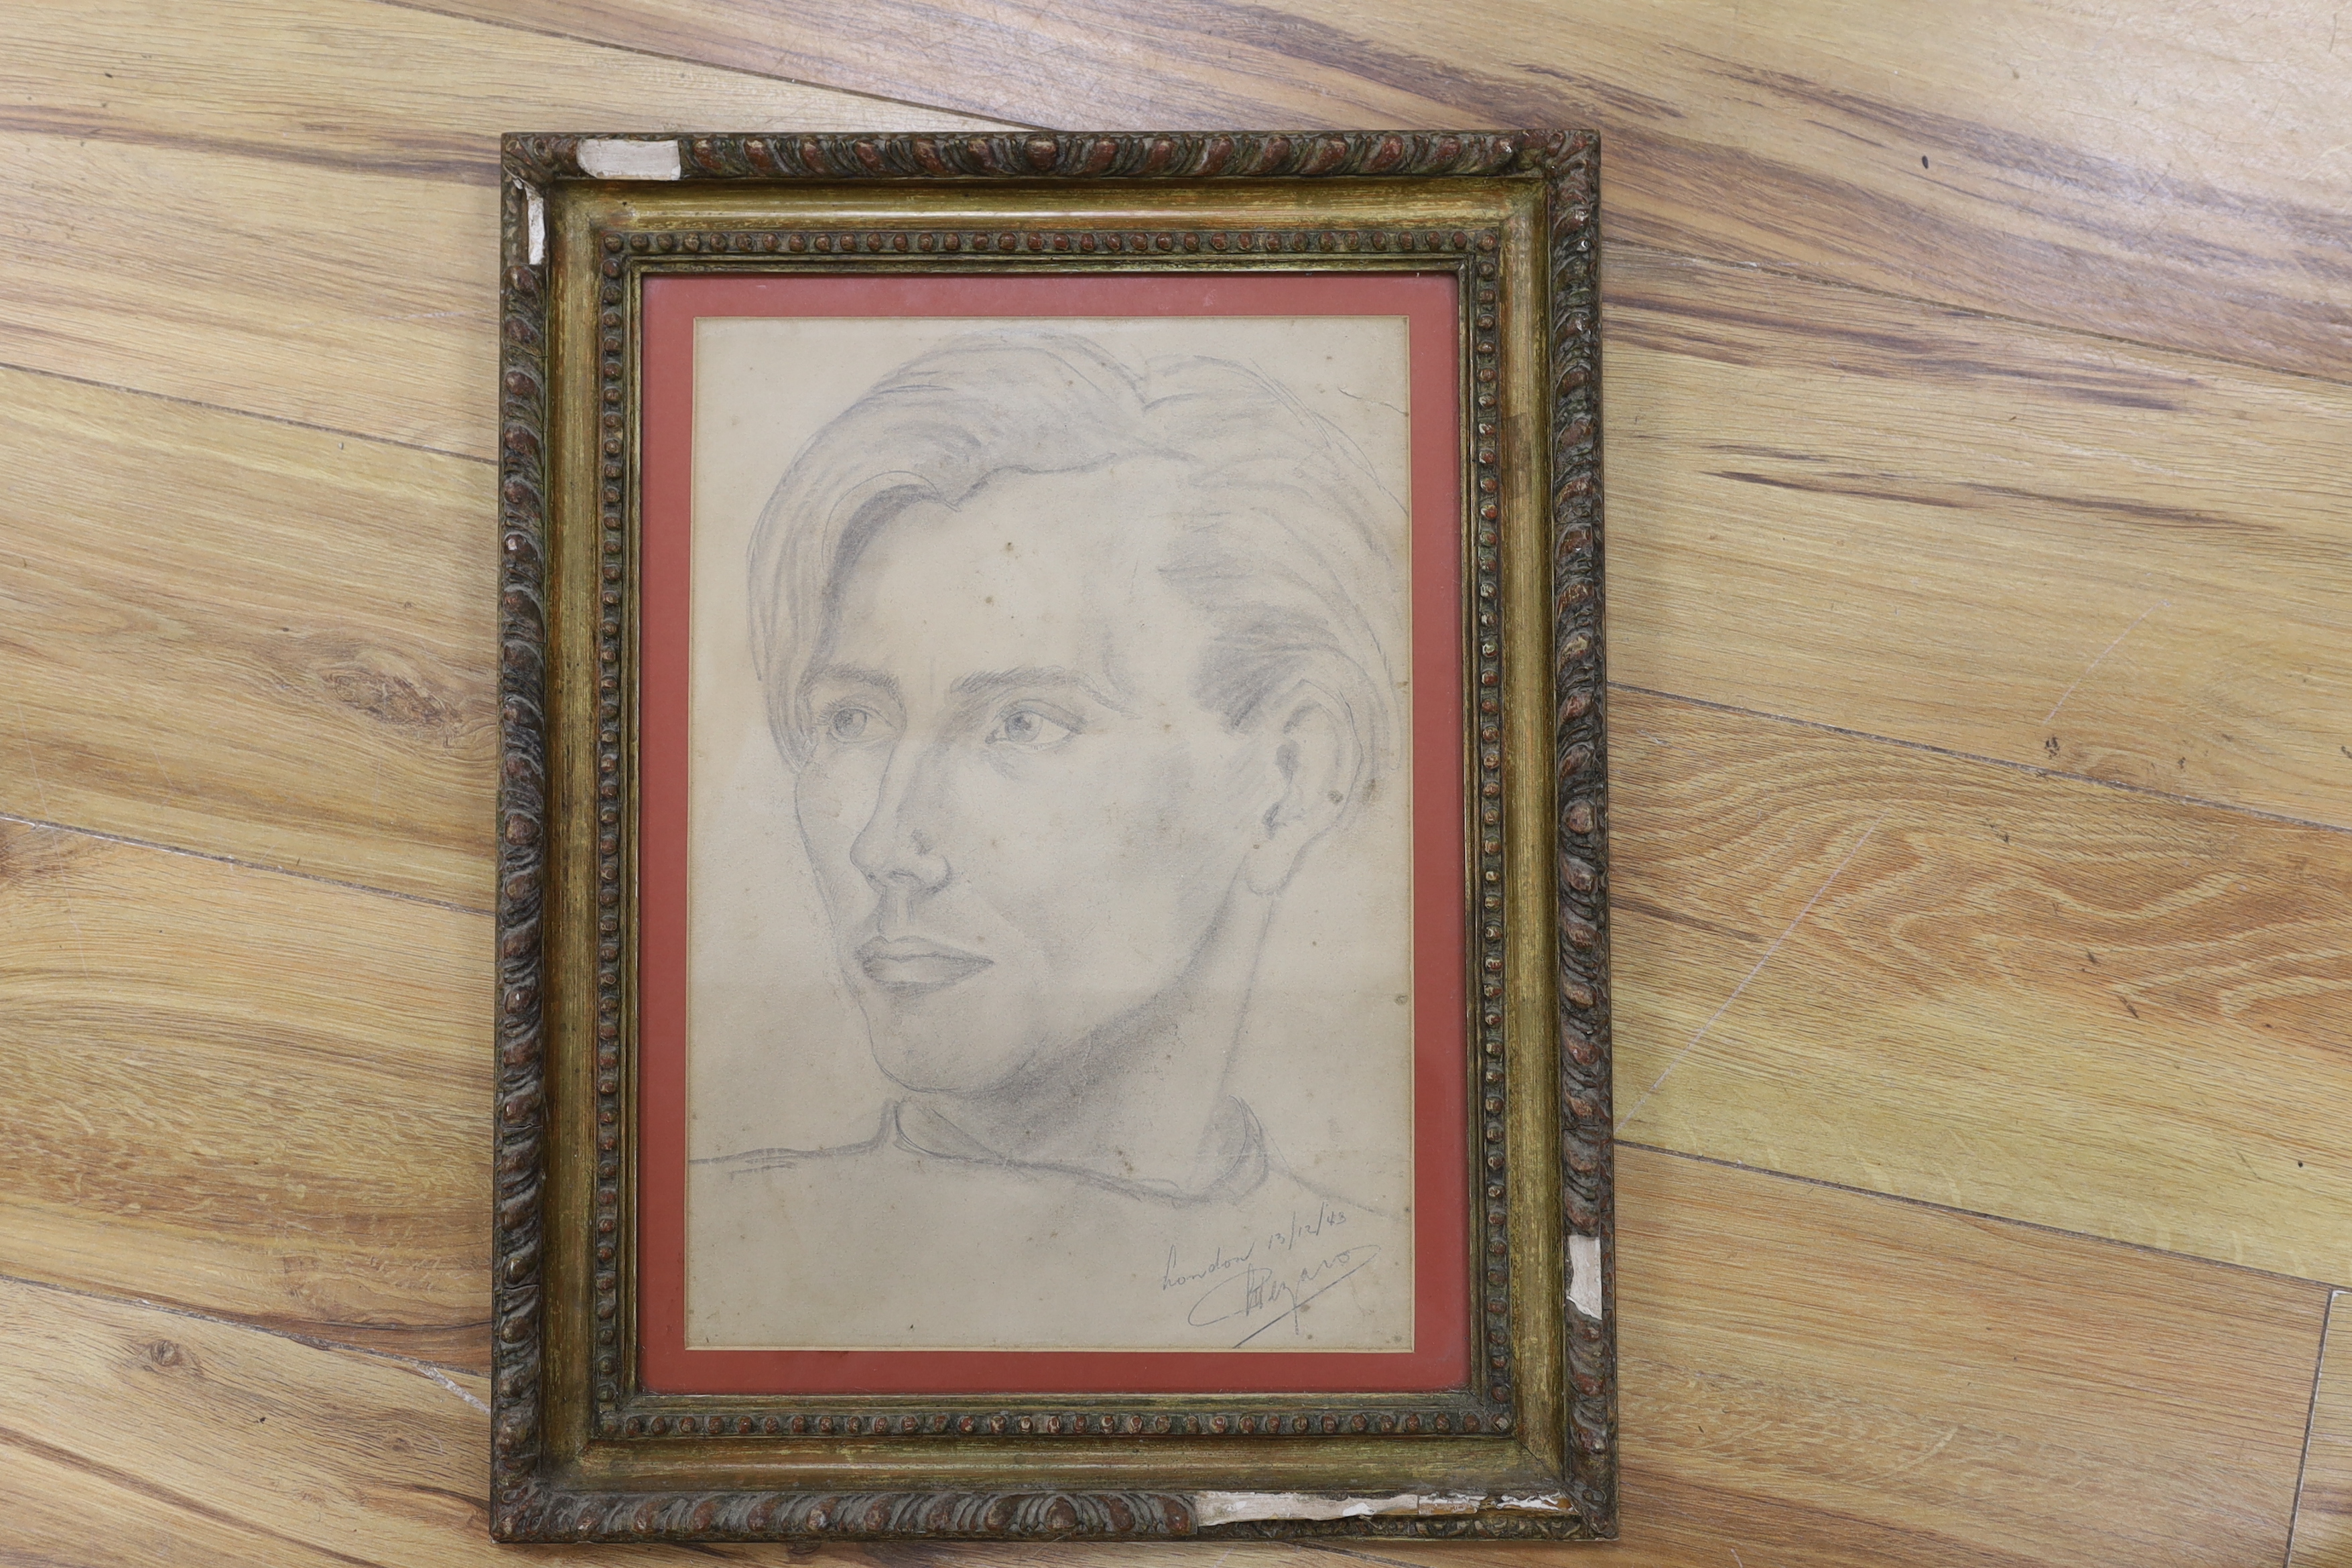 Mid 20th century English School, pencil, Study of a young man, inscribed London 13/12/43, indistinctly signed, 36 x 25cm